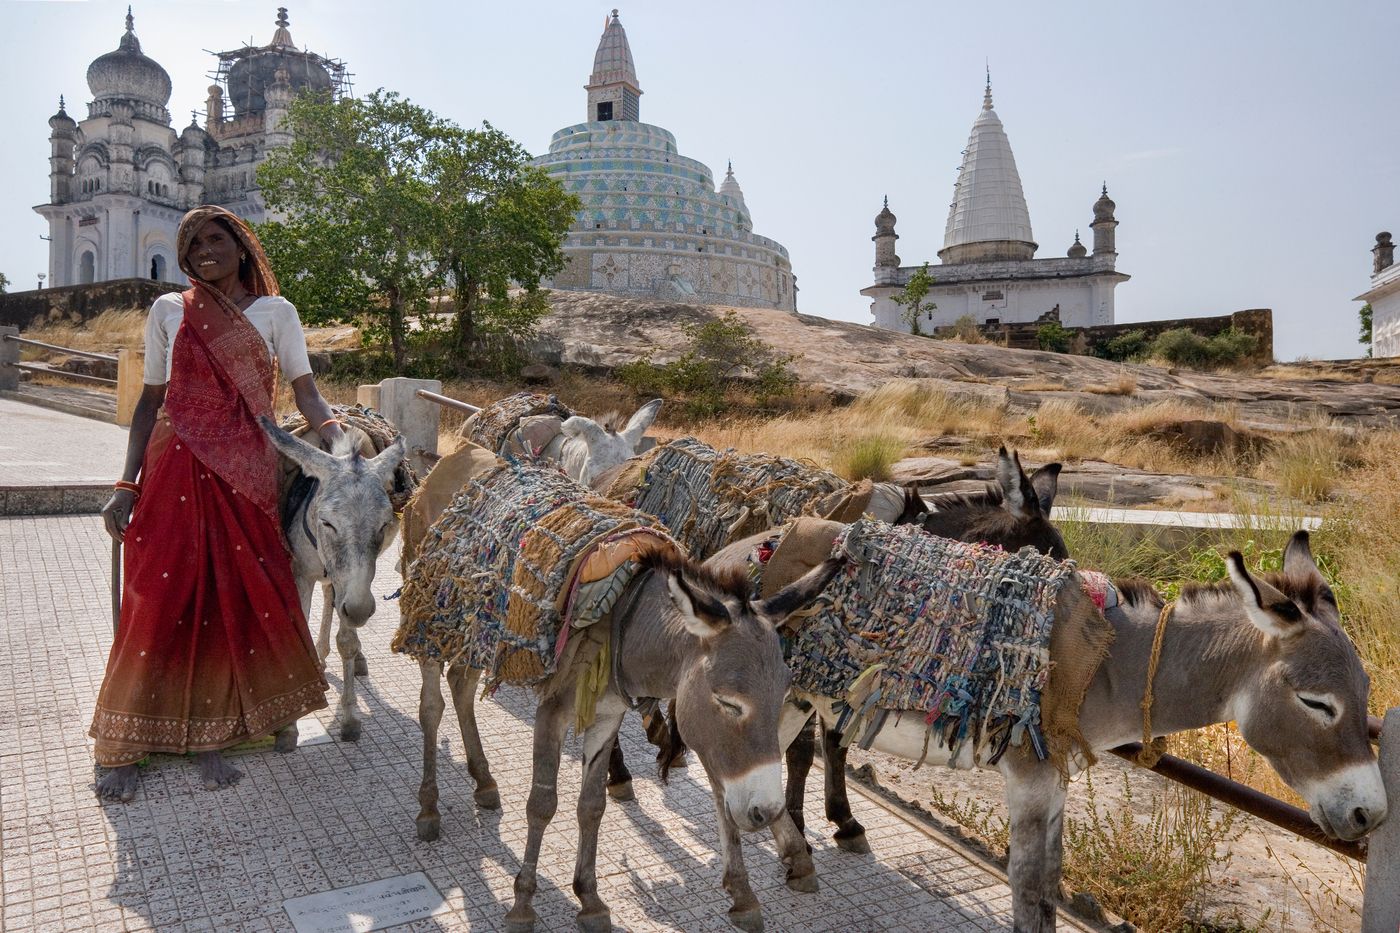 A village woman wearing traditional clothes, walking with her donkeys, in the Sonagiri Jain Temple complex